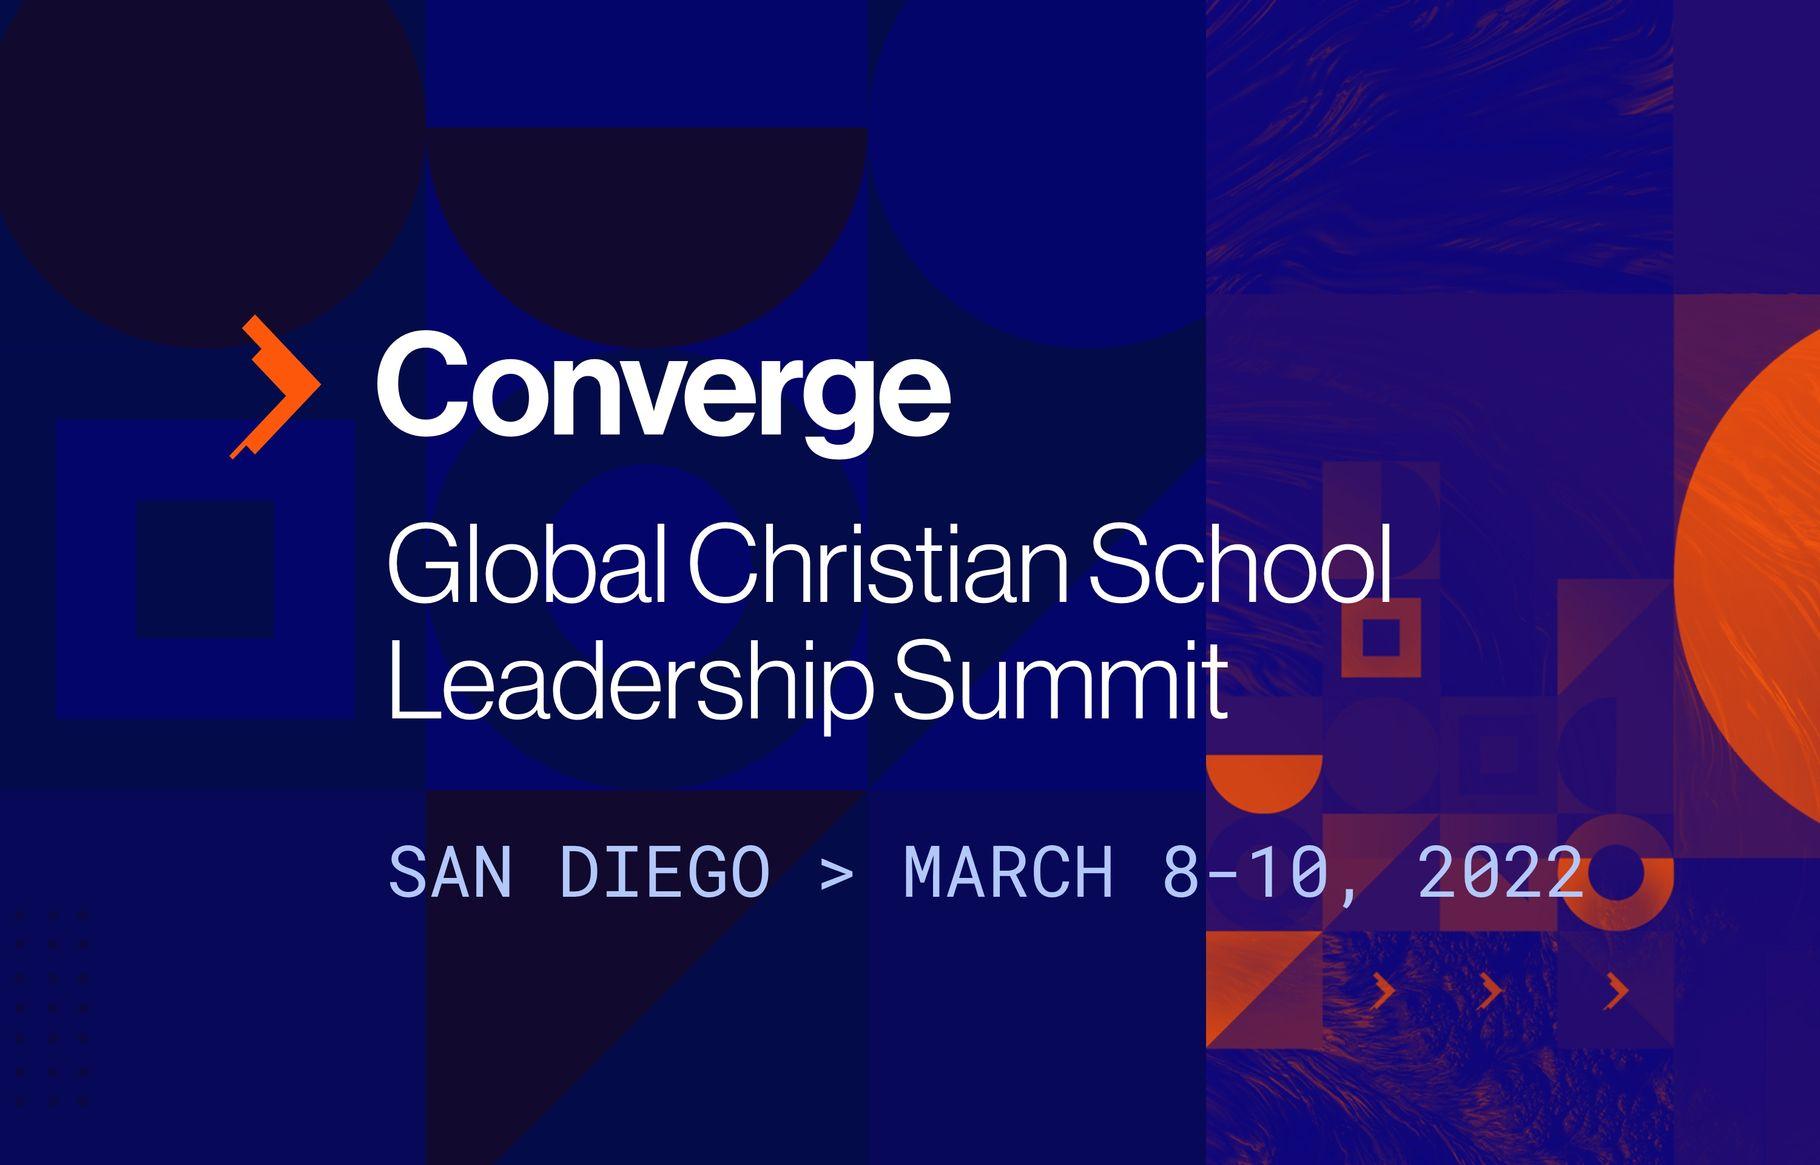 Why Is Cardus a Host Organization for Converge 2022?